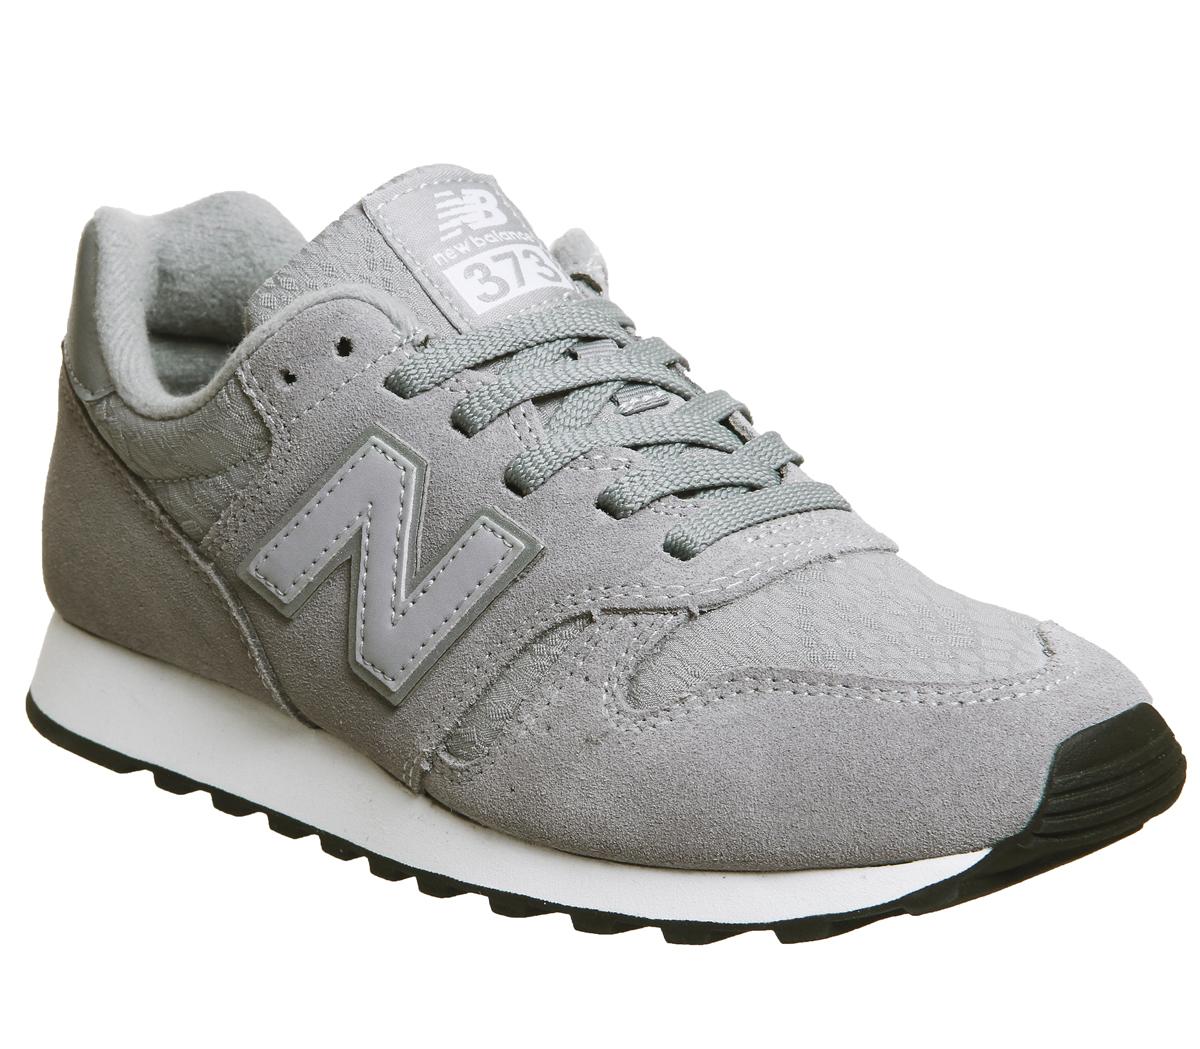 New Balance 373 Trainers Grey Lace 